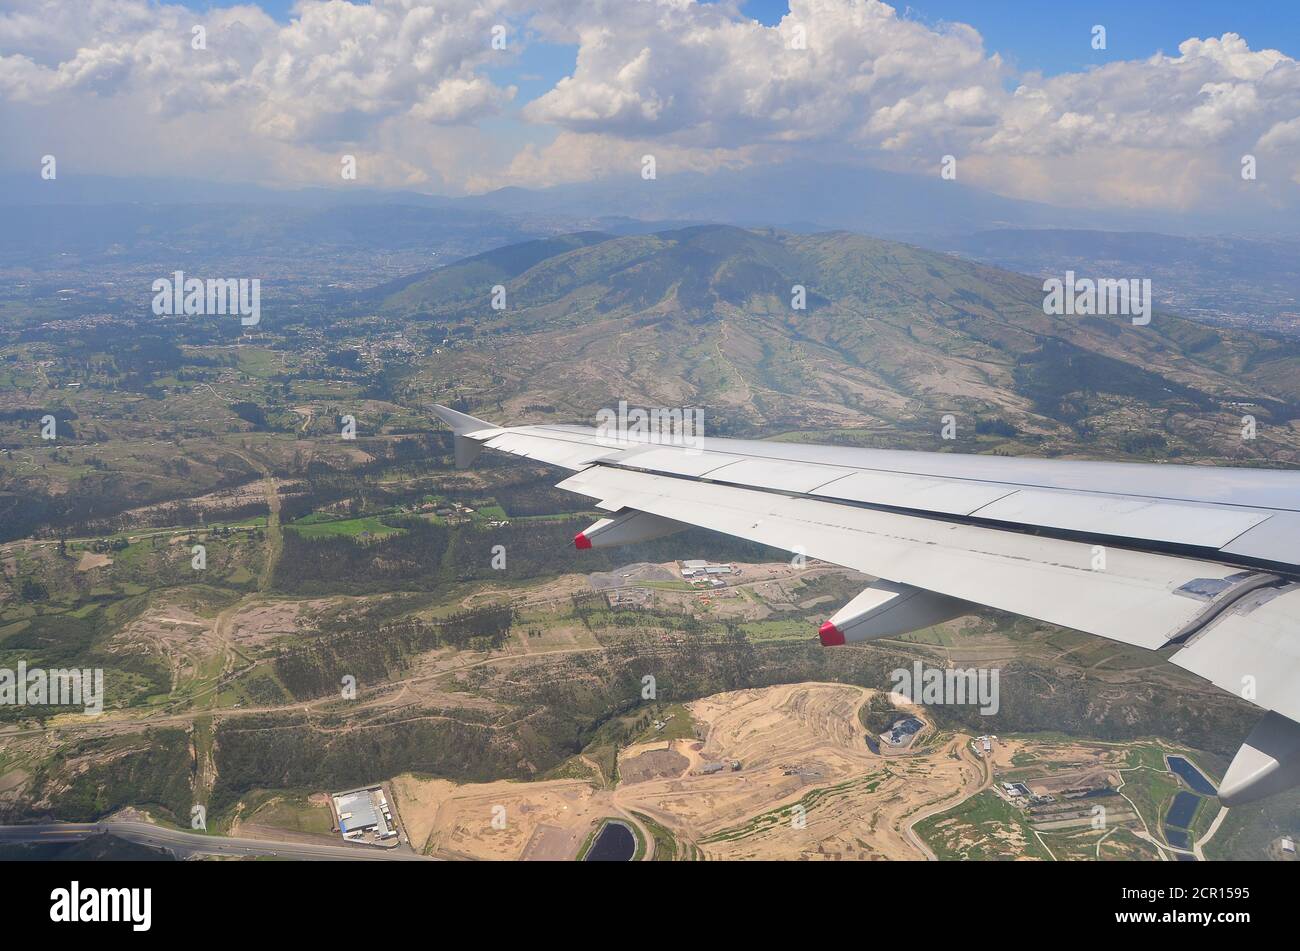 Airplane in the sky, travel image Stock Photo